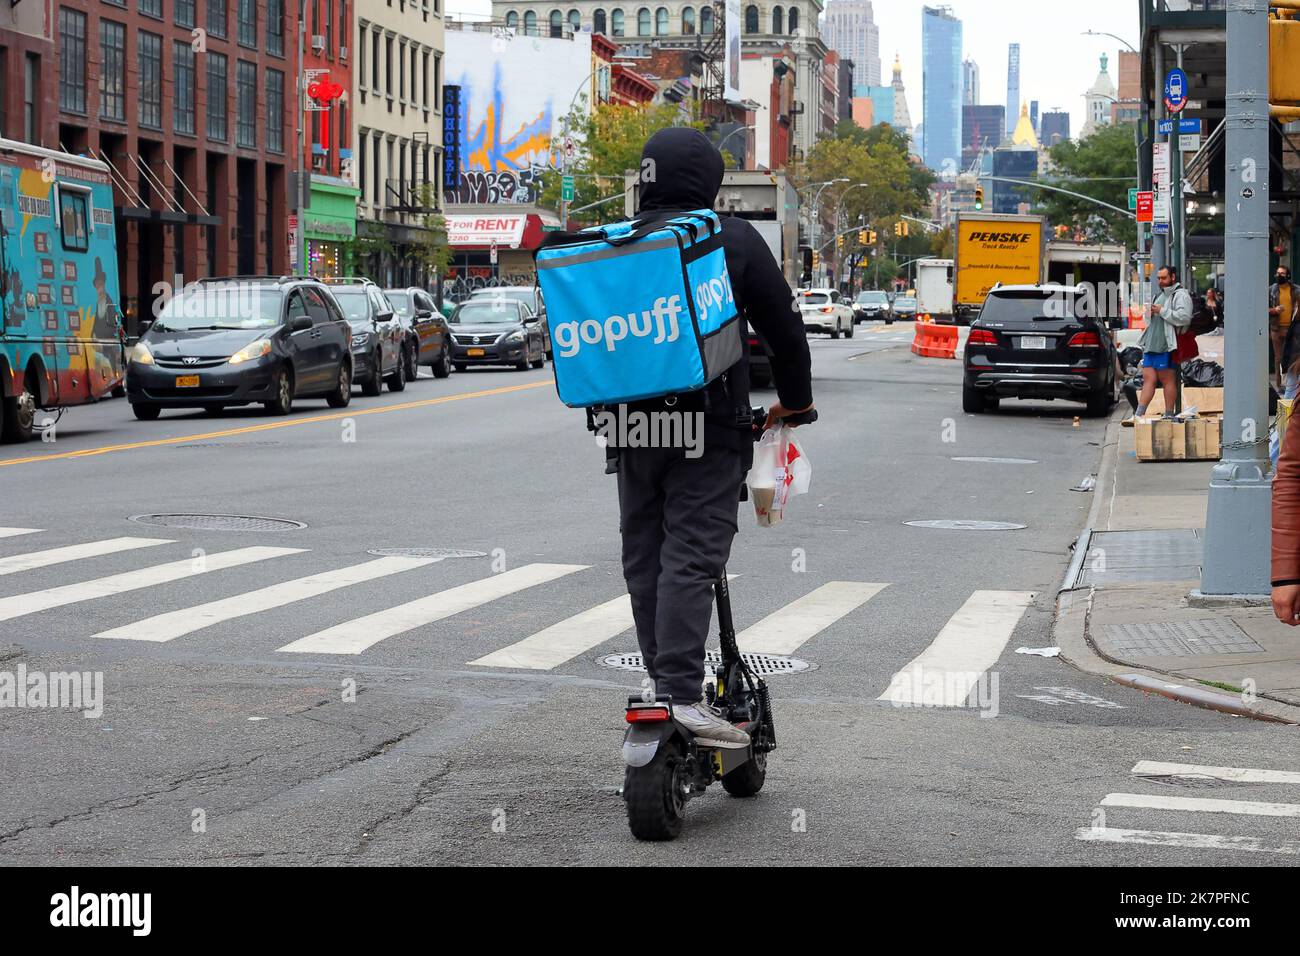 A Gopuff delivery person on an e scooter making an instant needs, rapid demand, on demand delivery in New York. part of quick commerce or q commerce Stock Photo